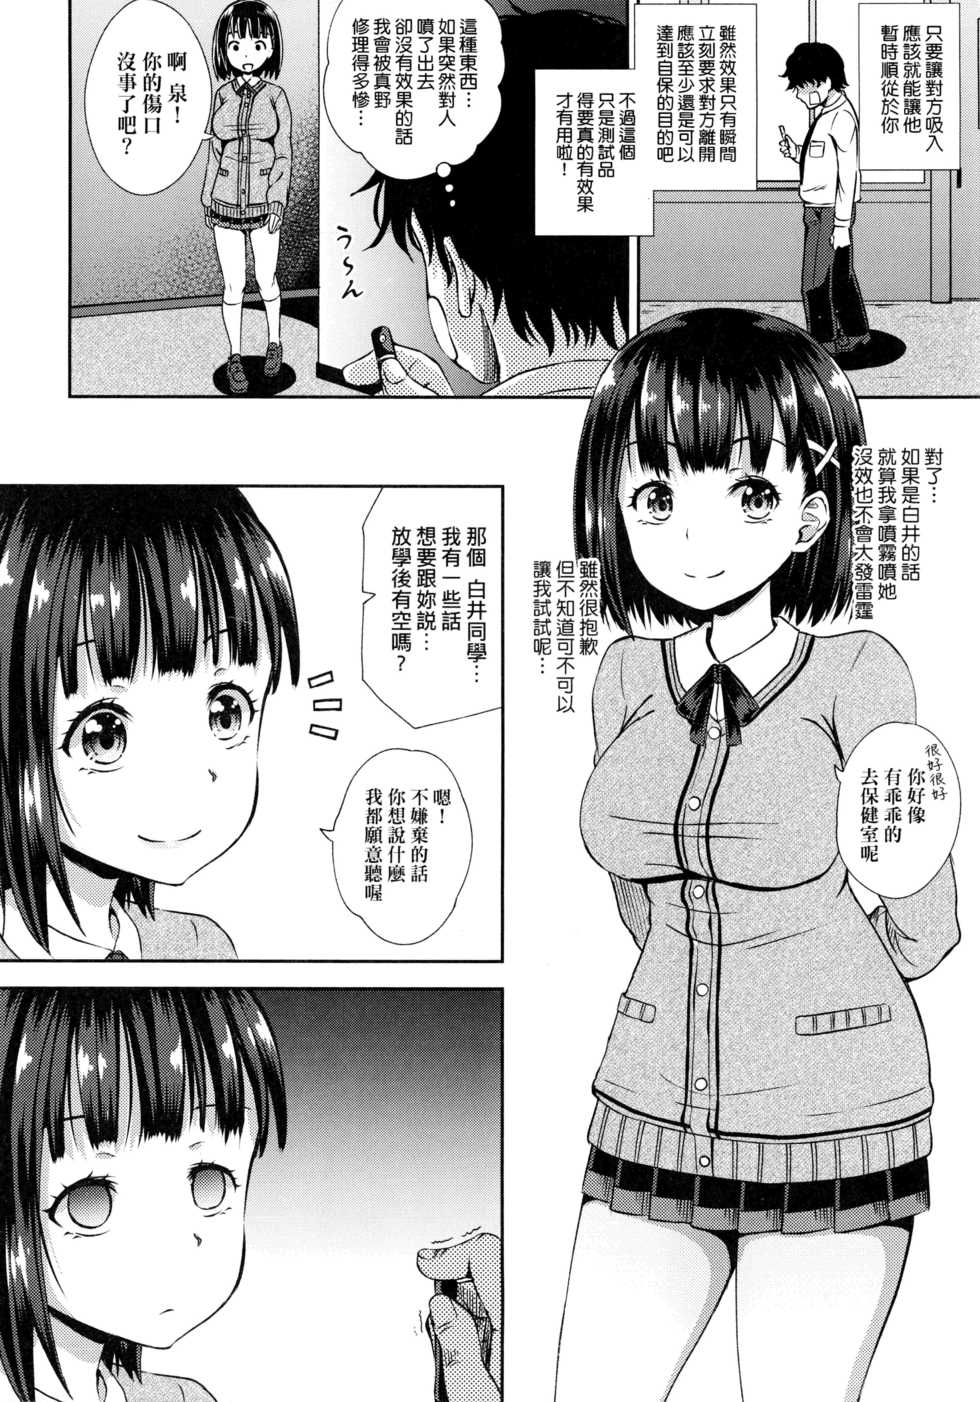 [Poncocchan] Saimin's Play | 強制催眠噴霧 [Chinese]  [Decensored] - Page 13